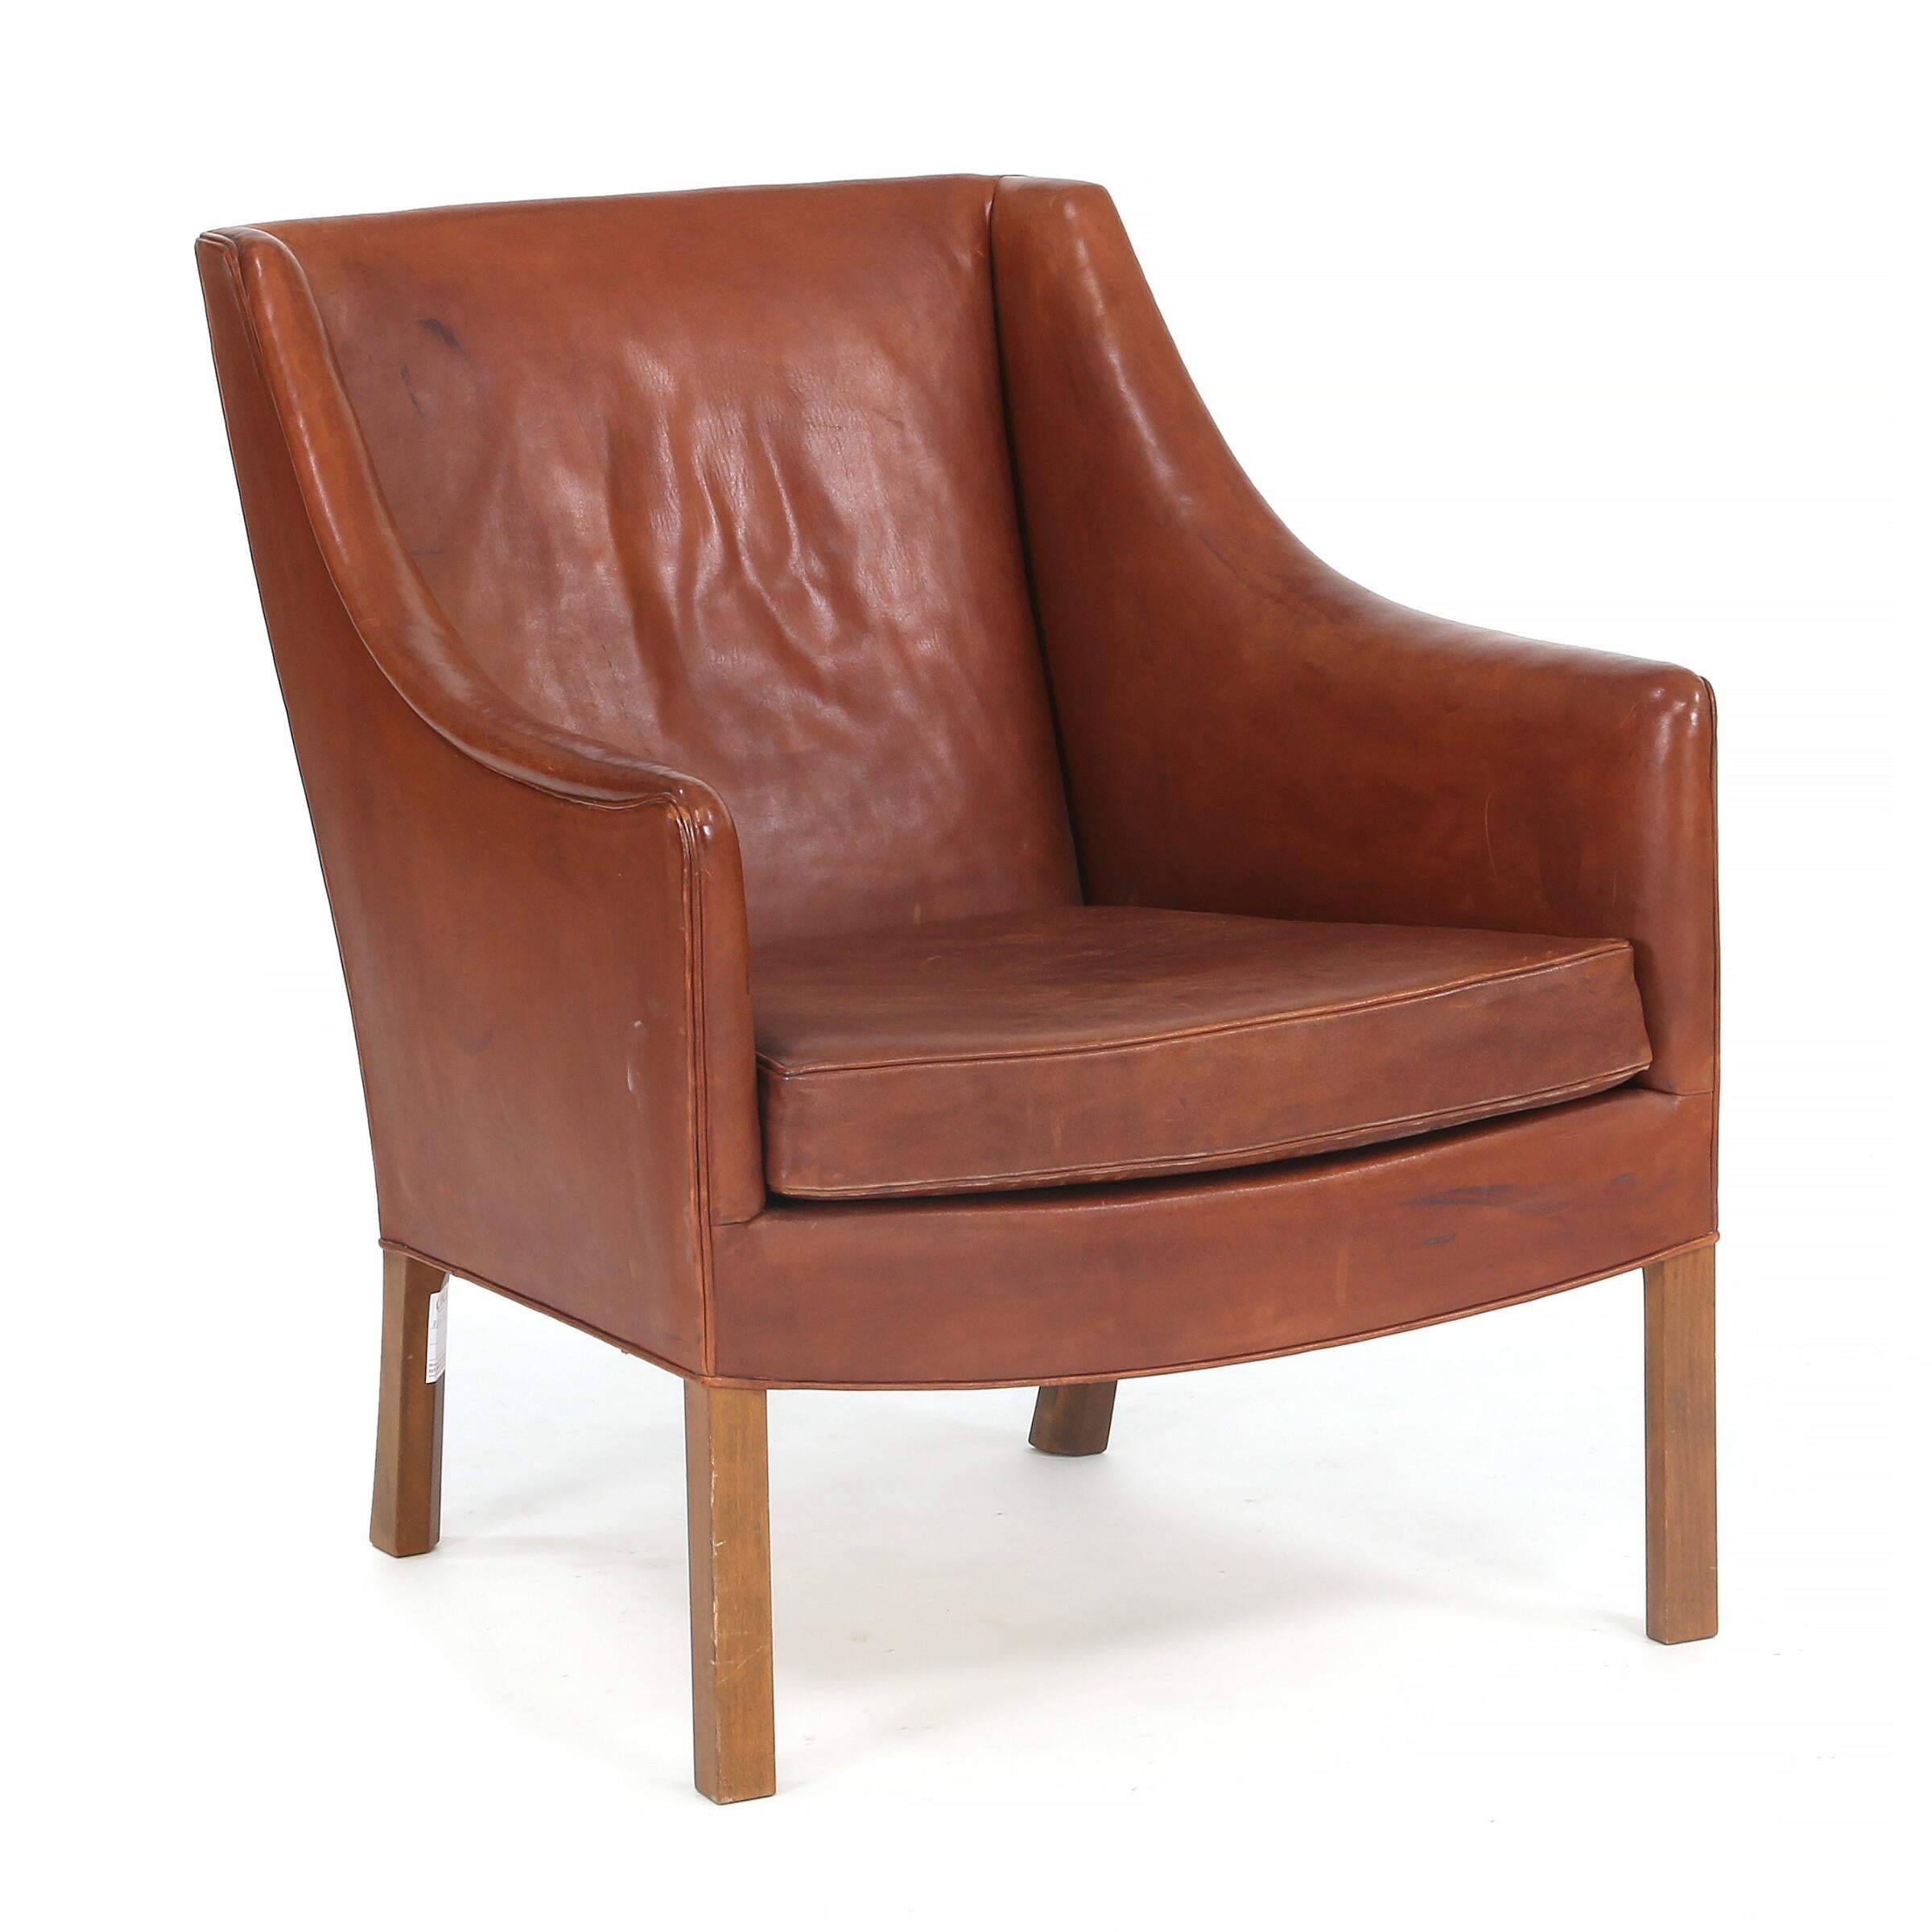 This armchair was designed by Borge Mogensen and made and labeled by Johannes Hansen during the 1960s. The chair retains it original brown leather in good condition with normal signs of use. Not many of this chair were made. 

Similar in design to